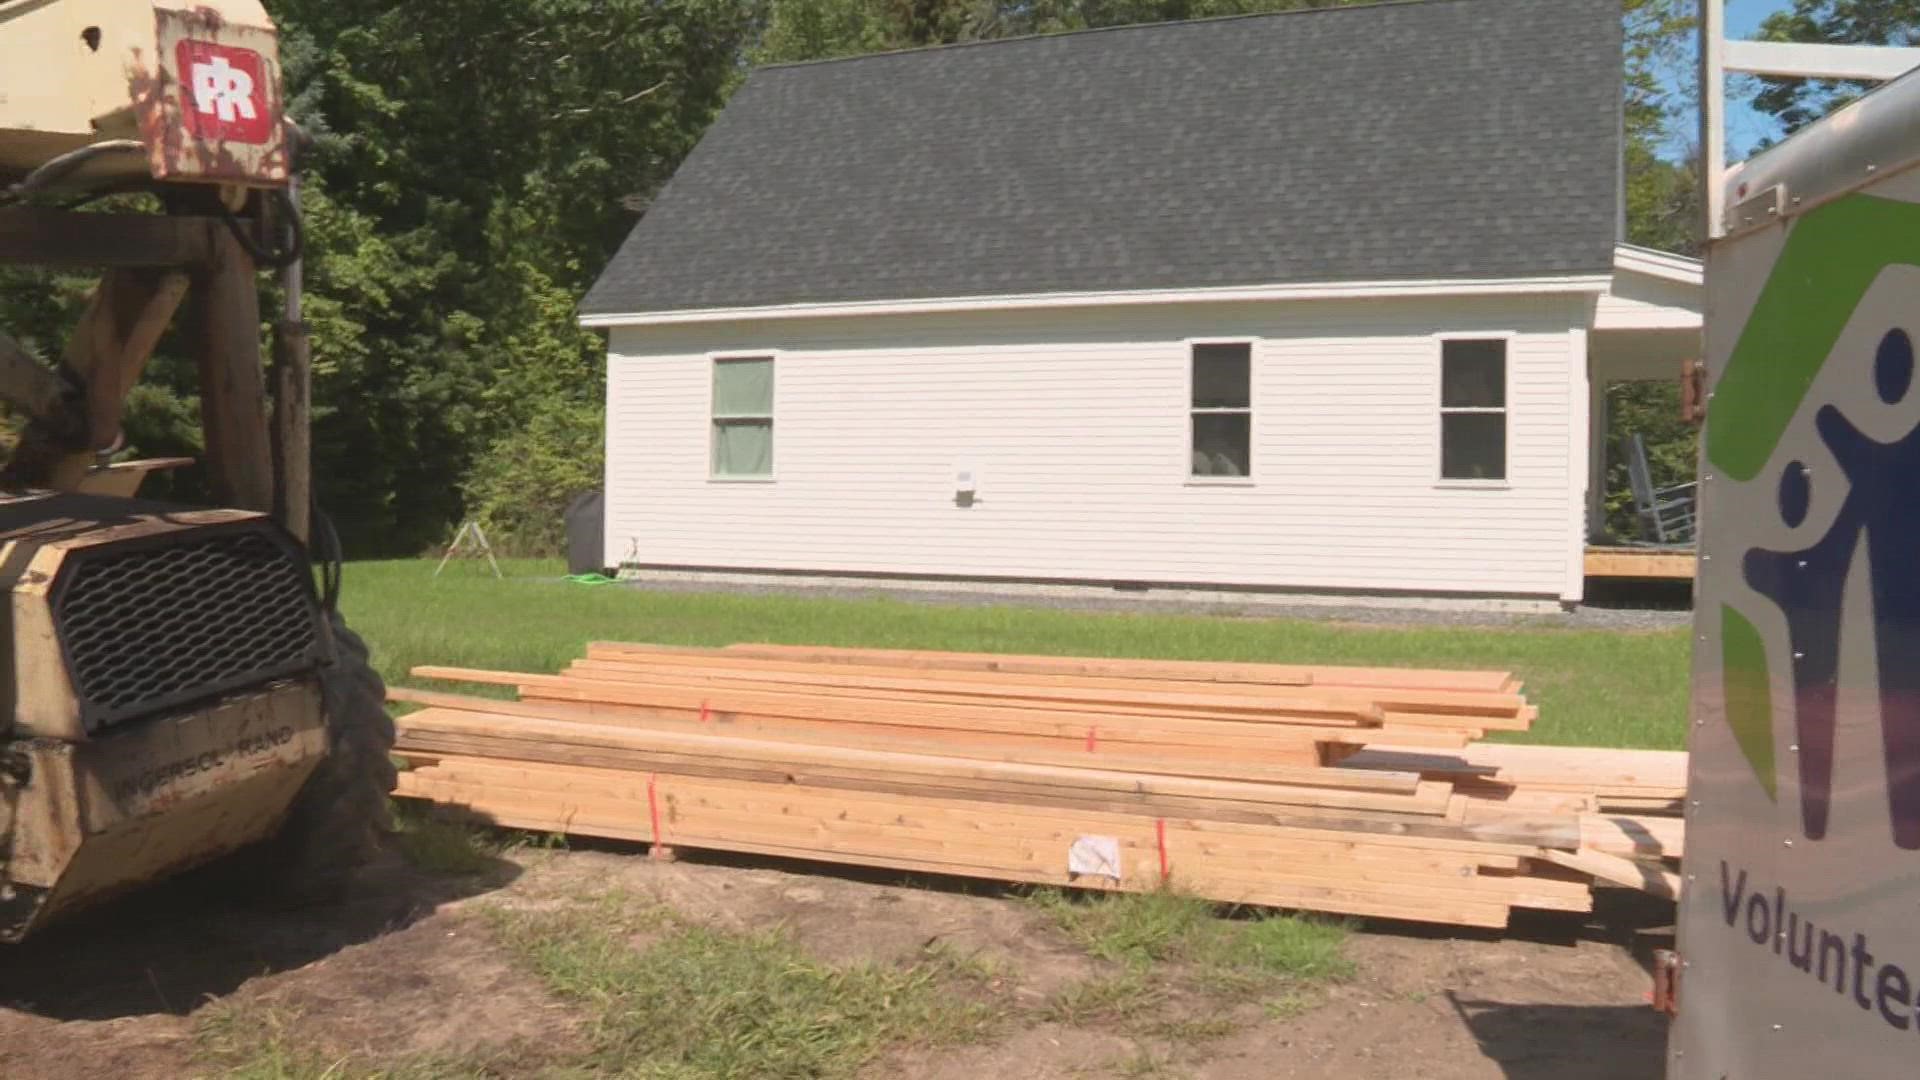 Habitat for Humanity York County is bringing back its Hops for Habitat program to help raise $60K to complete a home project in Kennebunkport.